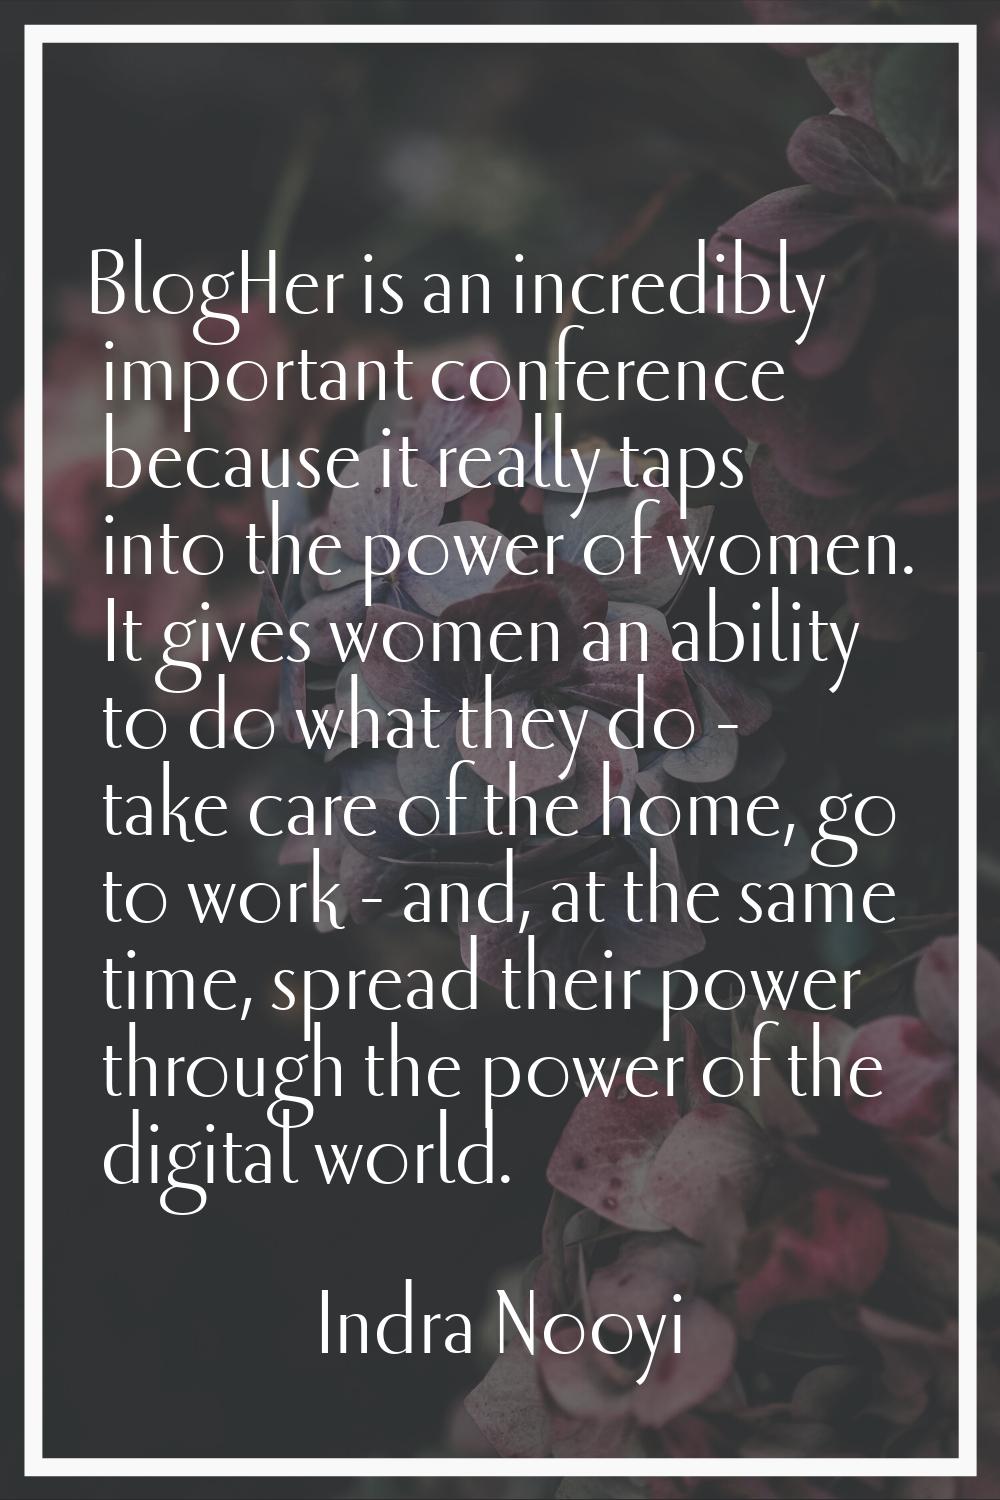 BlogHer is an incredibly important conference because it really taps into the power of women. It gi